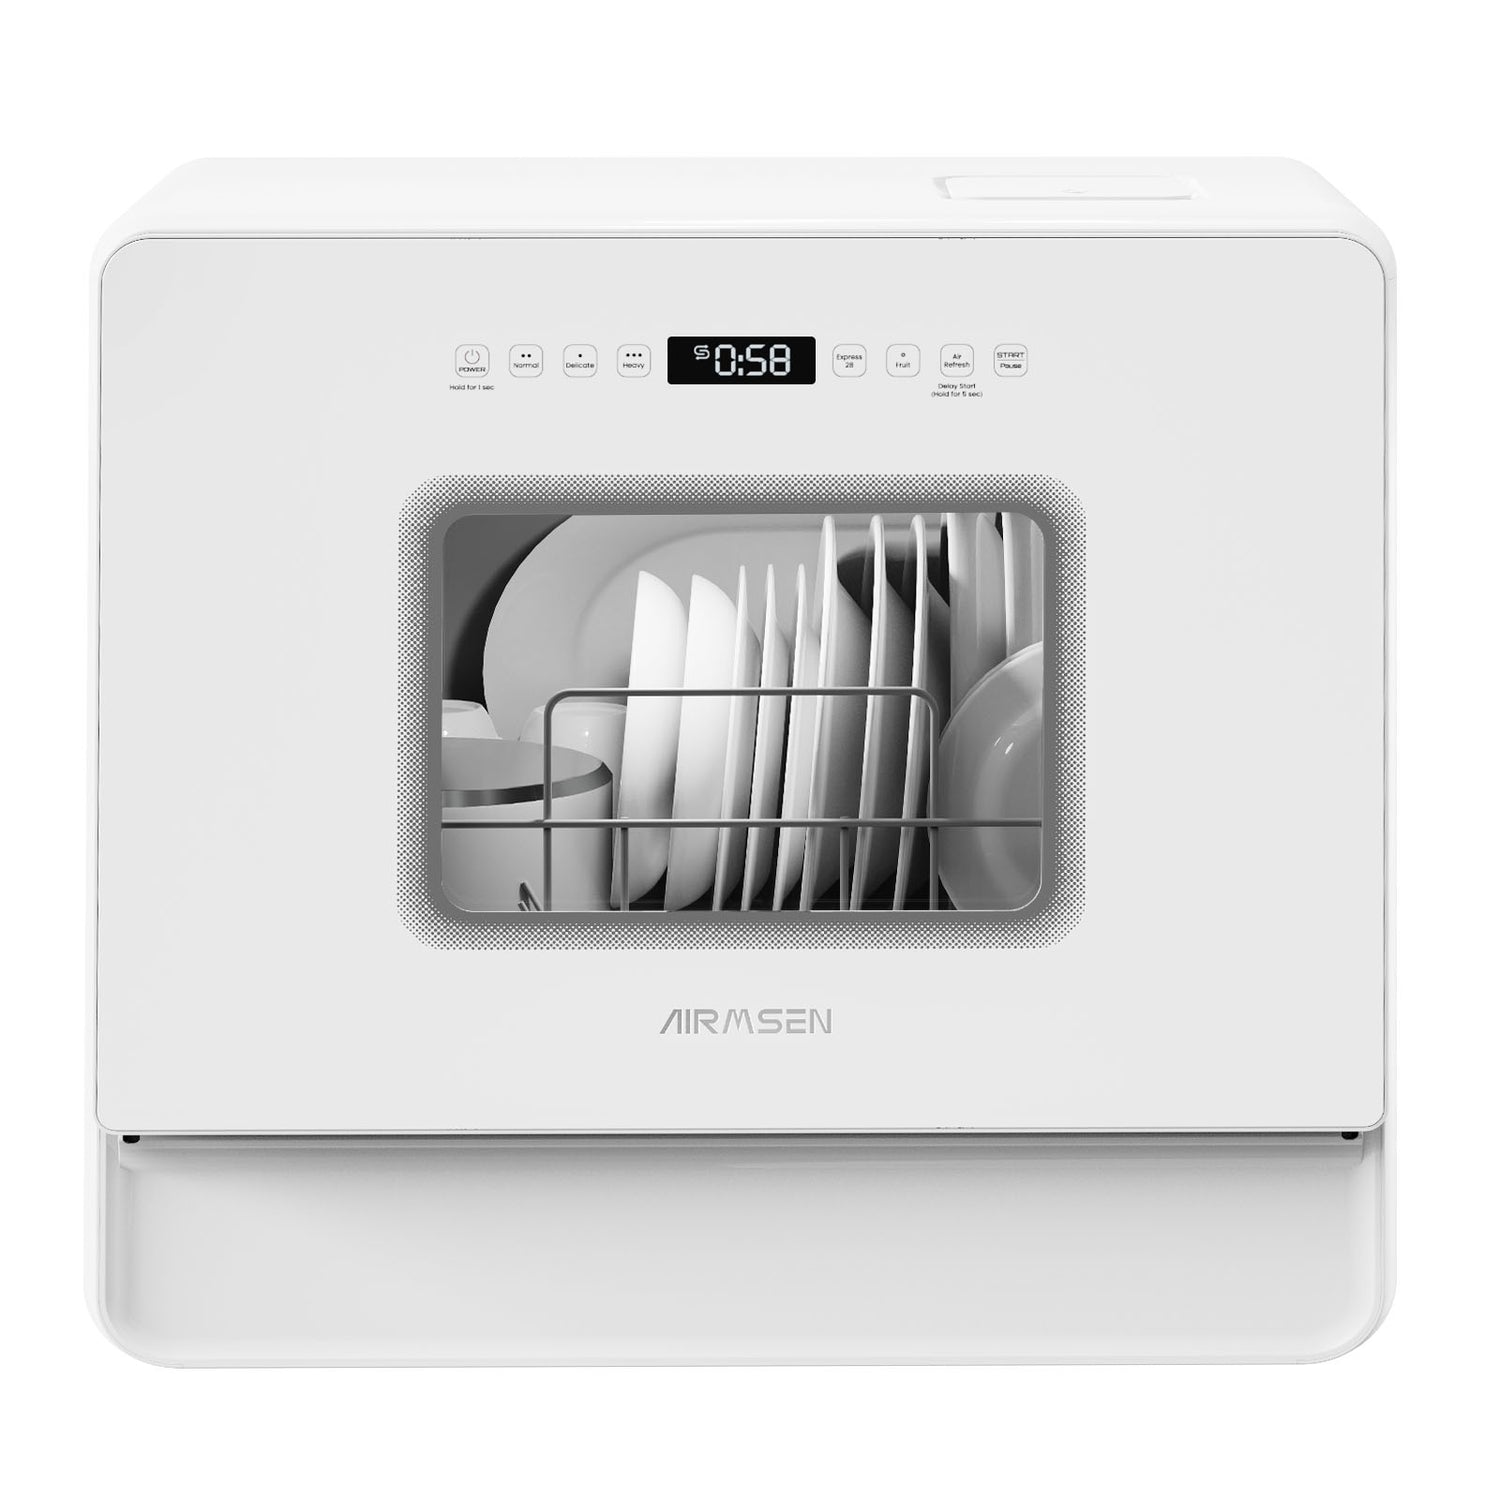 Portable Countertop Dishwasher with Built-in Water Tank, 5 Place Settings